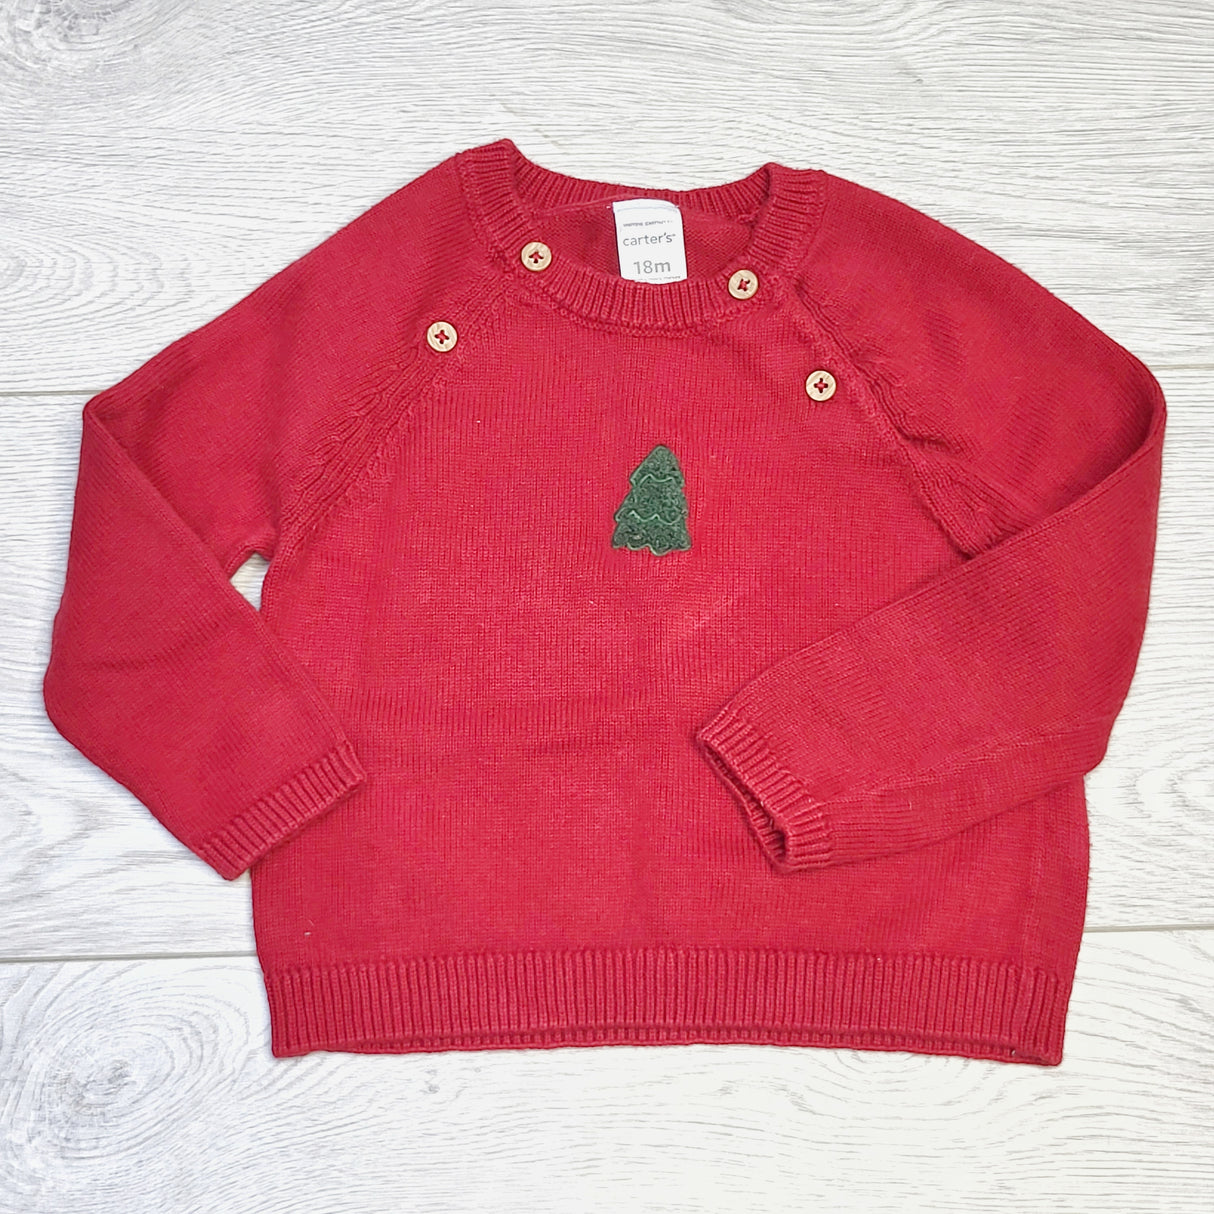 MIRE1 - Carters red sweater with Christmas tree, size 18 months